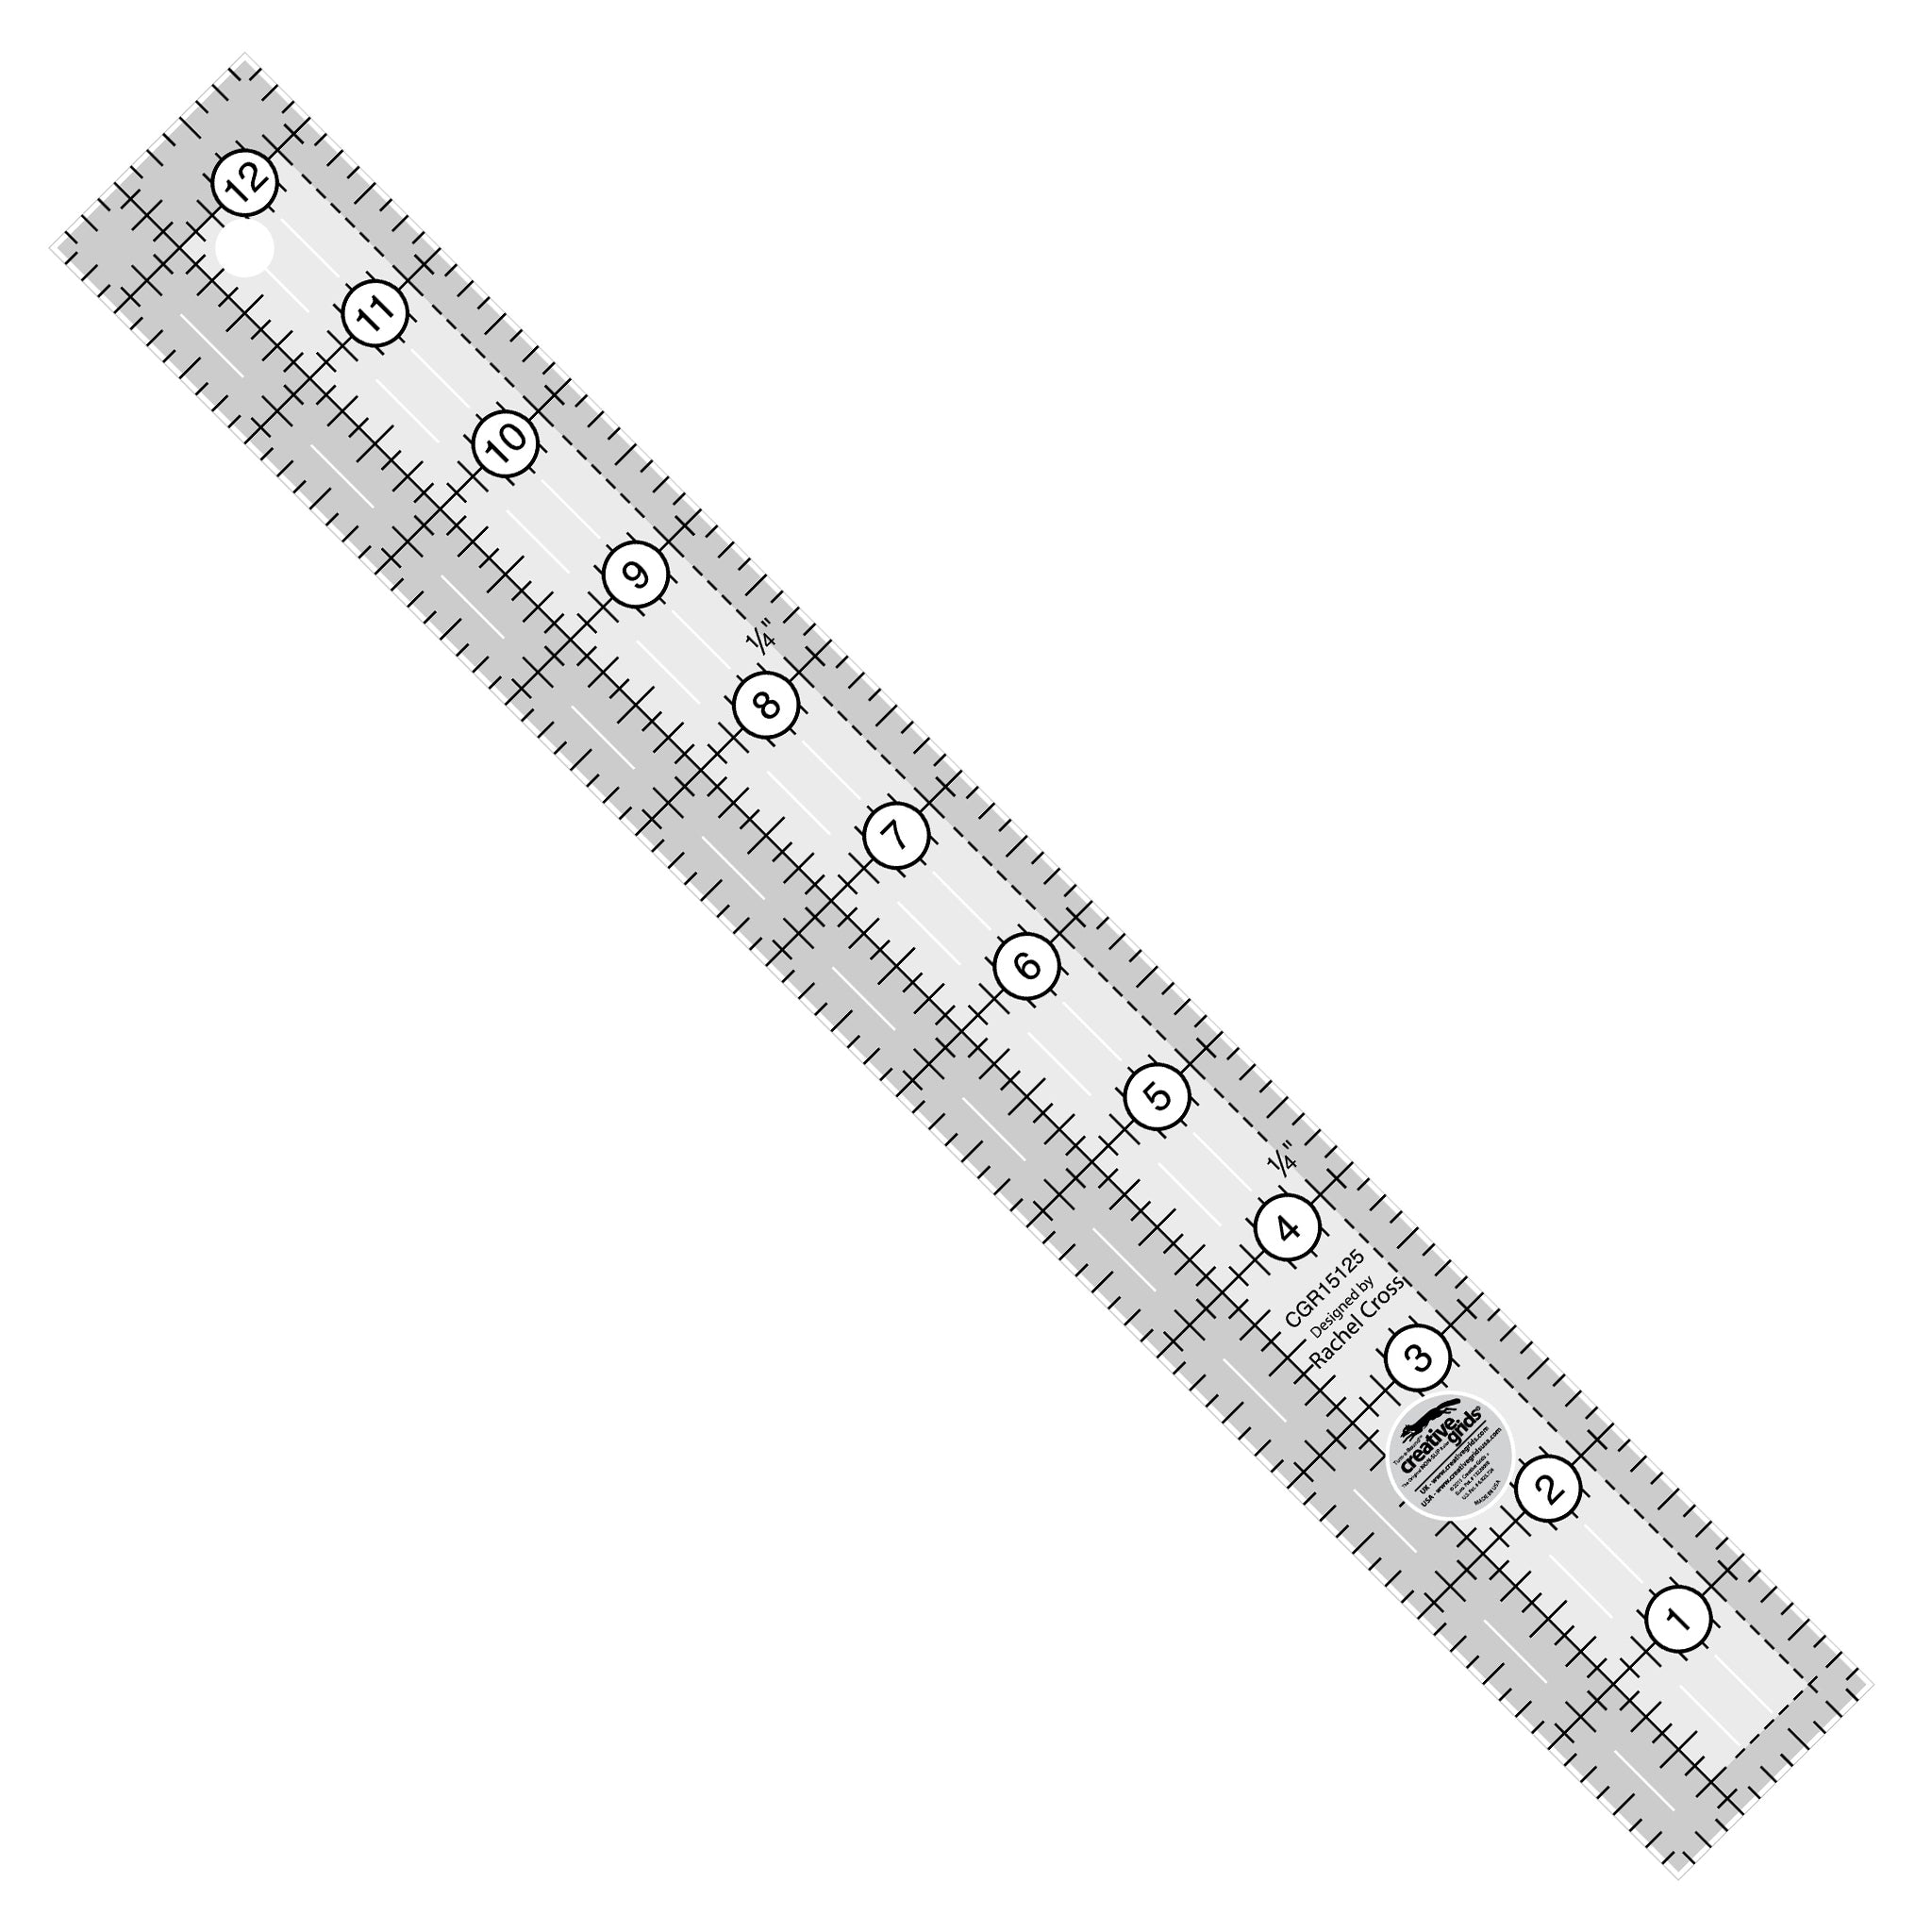 Sewing Creative Ruler Fabric Cutting Ruler Quilting Supplies and